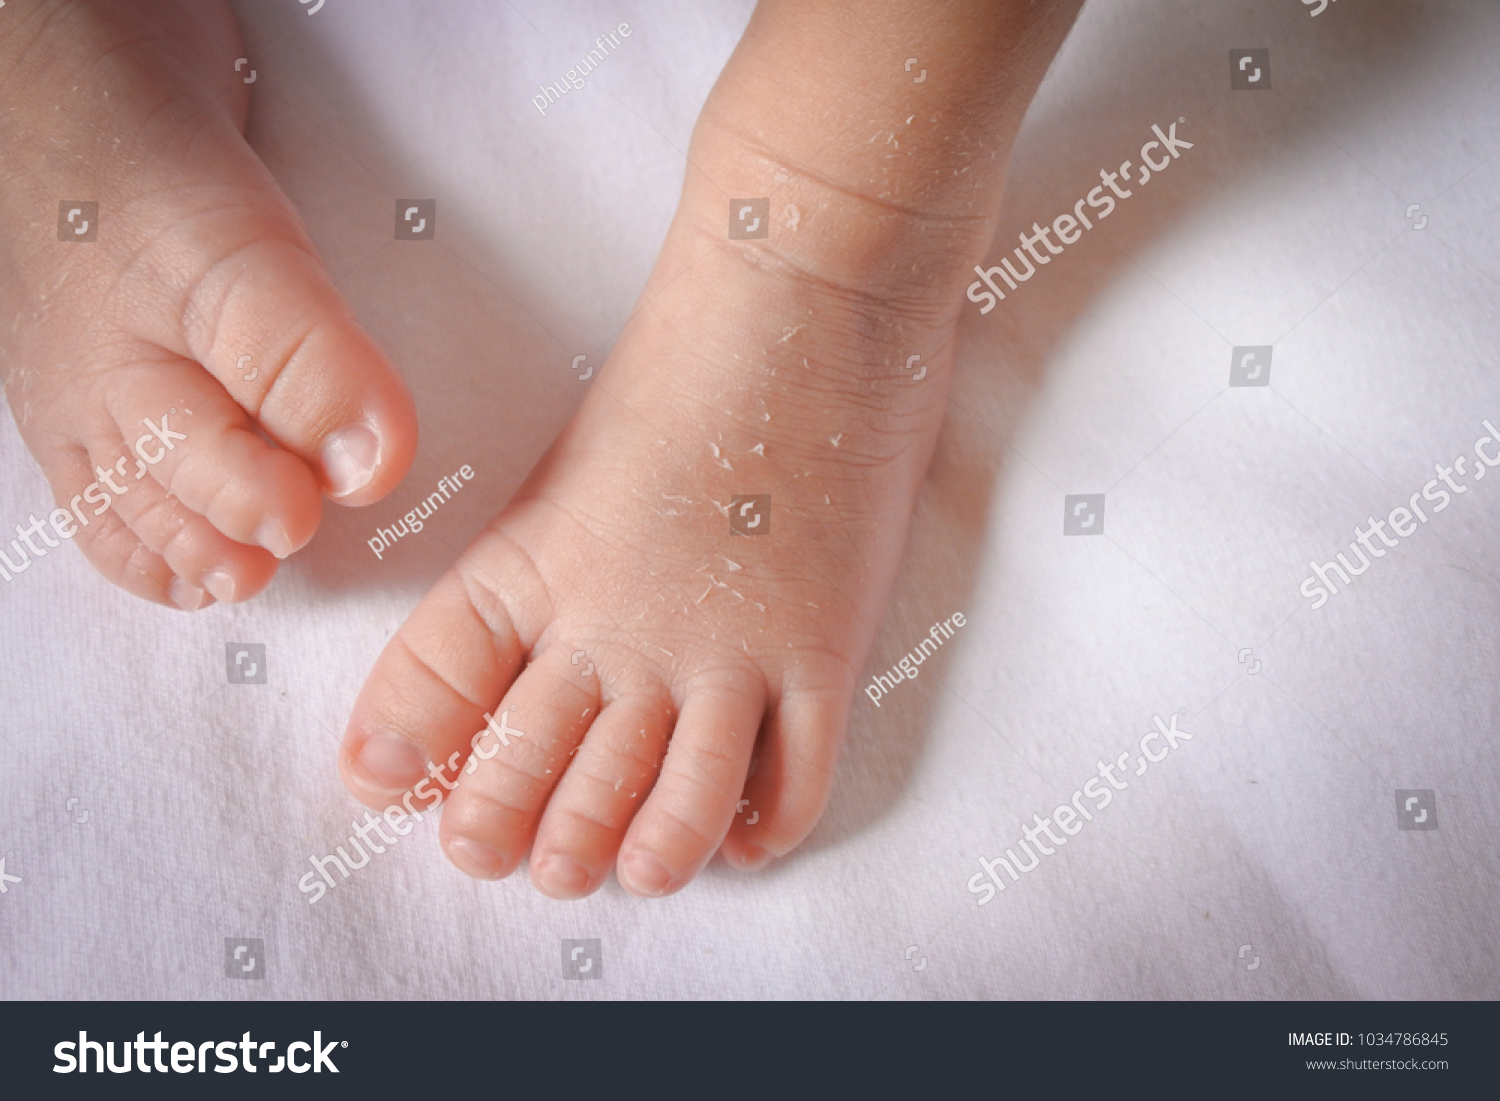 Baby Feet Dry Out Skin Baby Stock Photo 